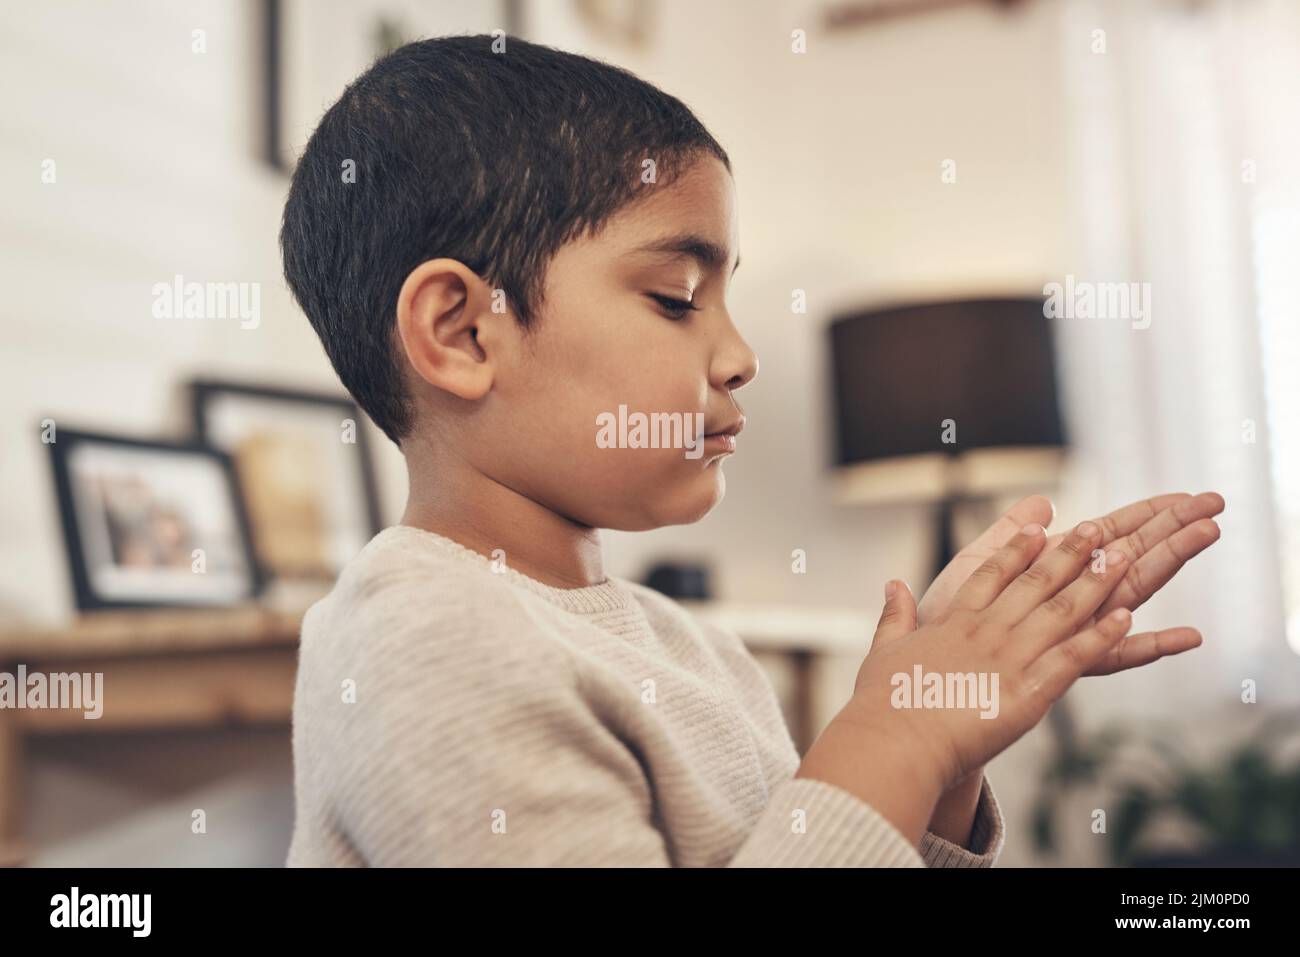 Not today, dirt. an adorable little boy disinfecting his hands at home. Stock Photo